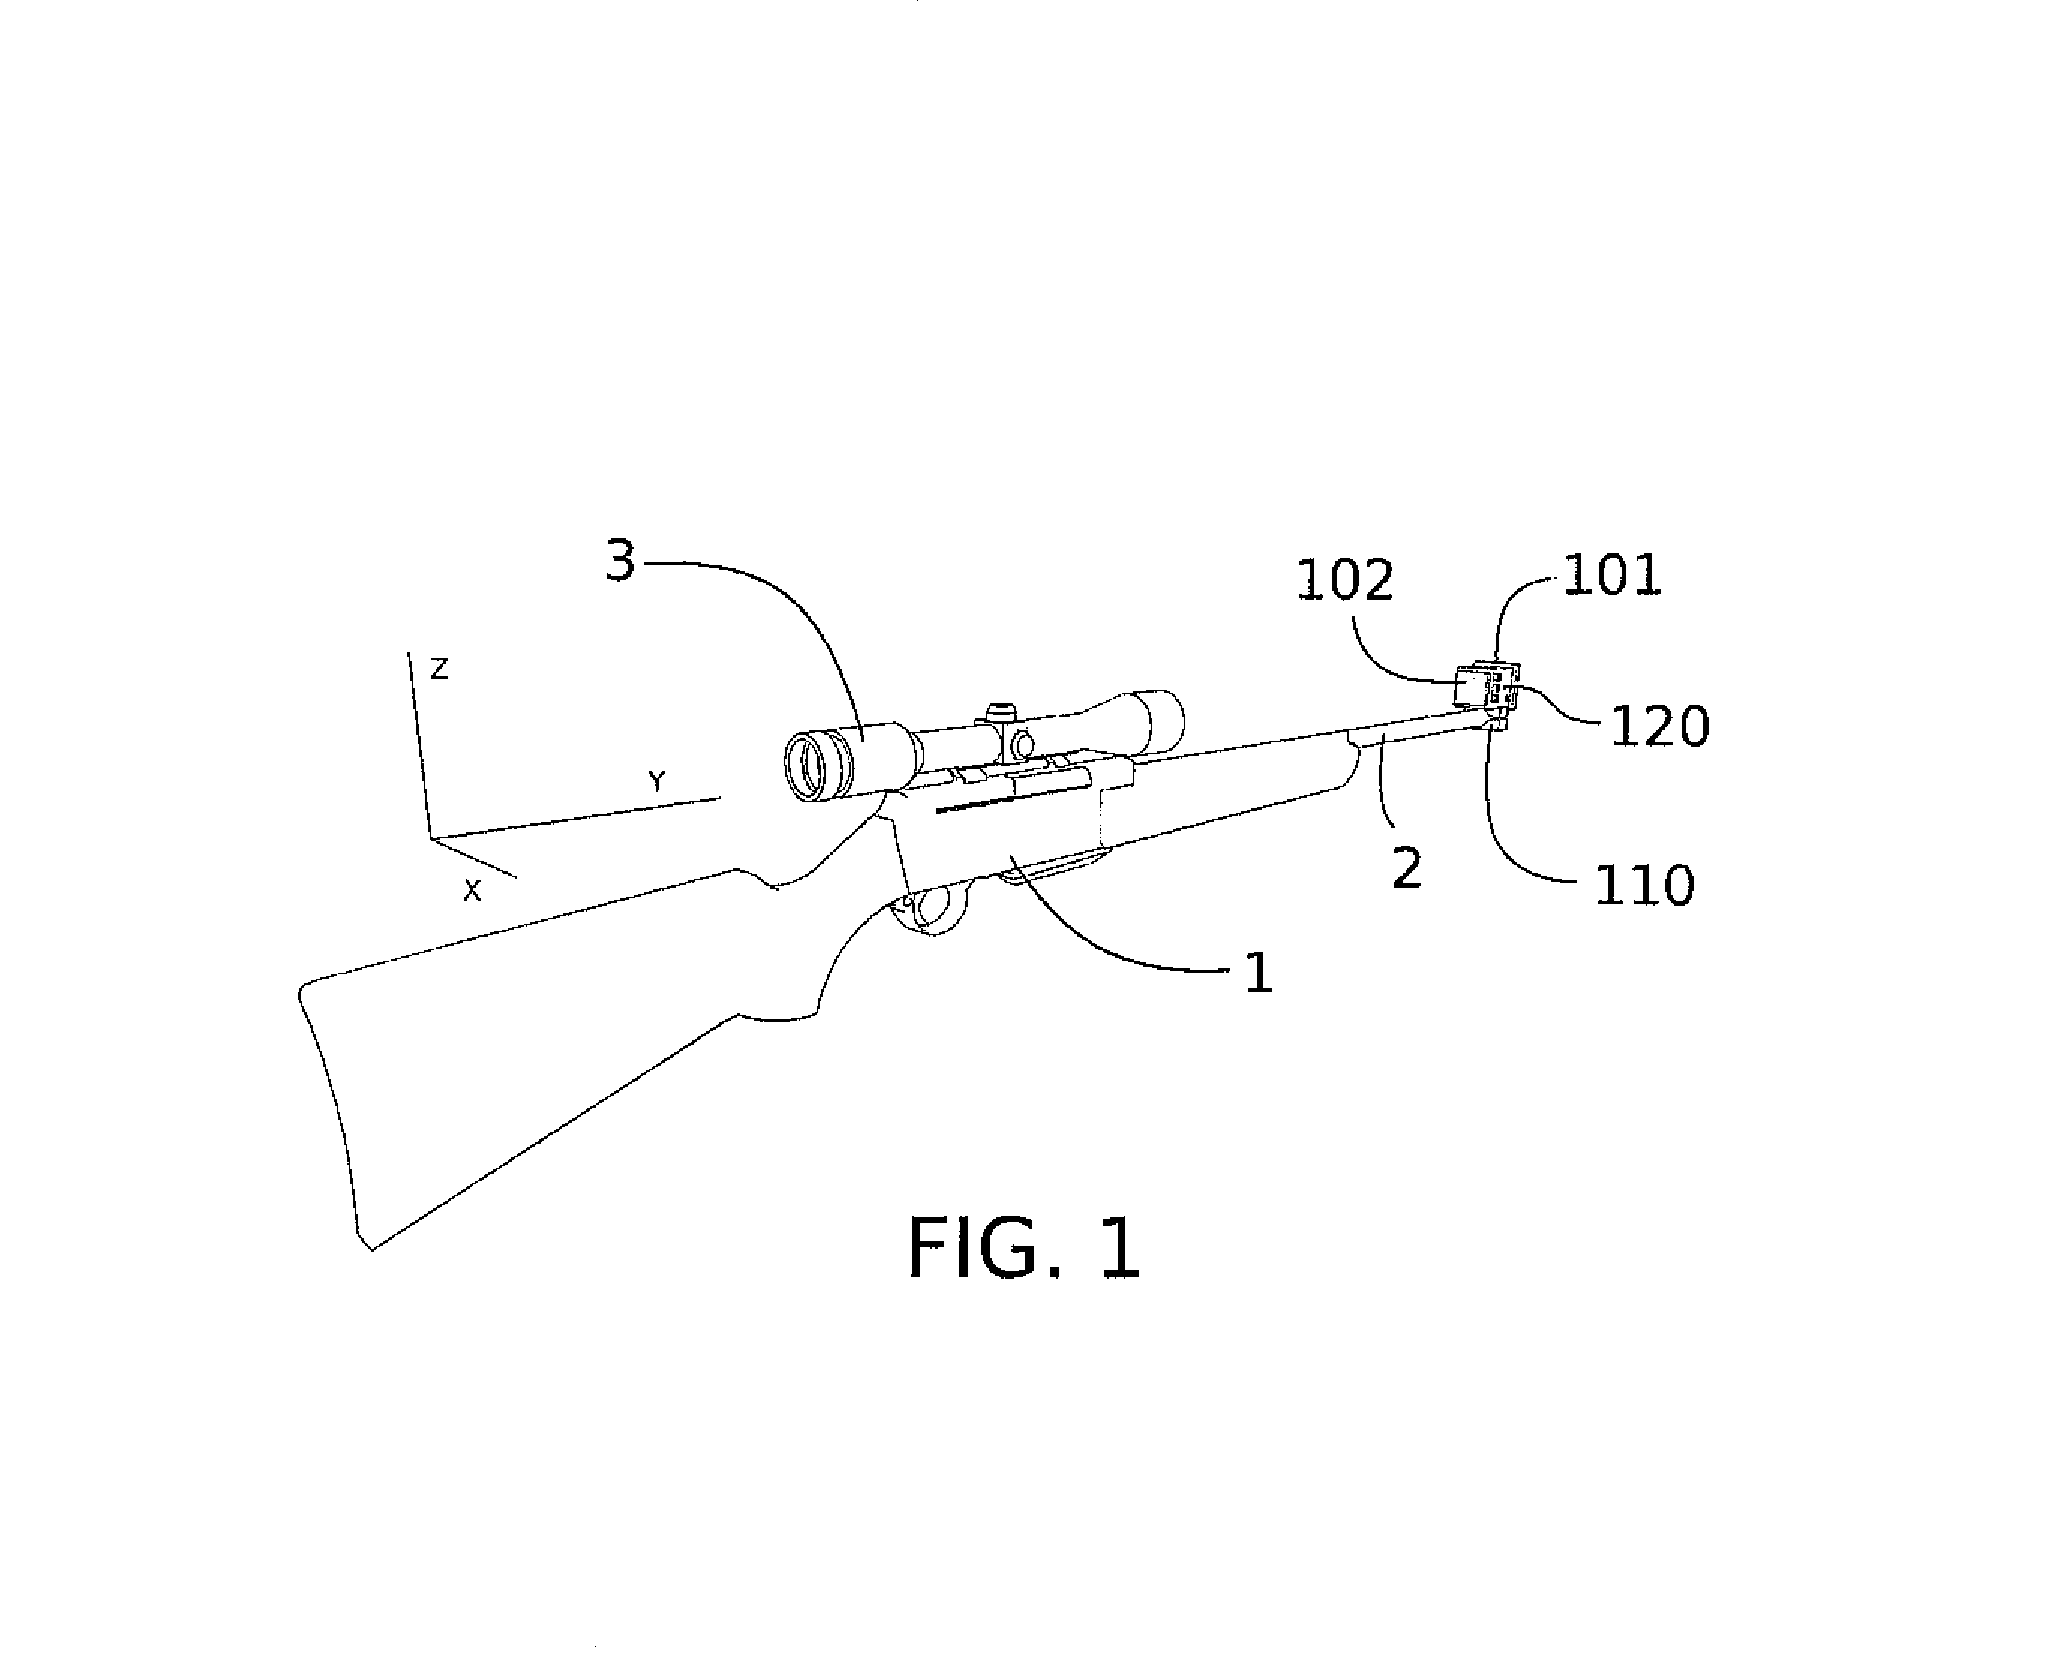 Training aid for devices requiring line-of-sight aiming